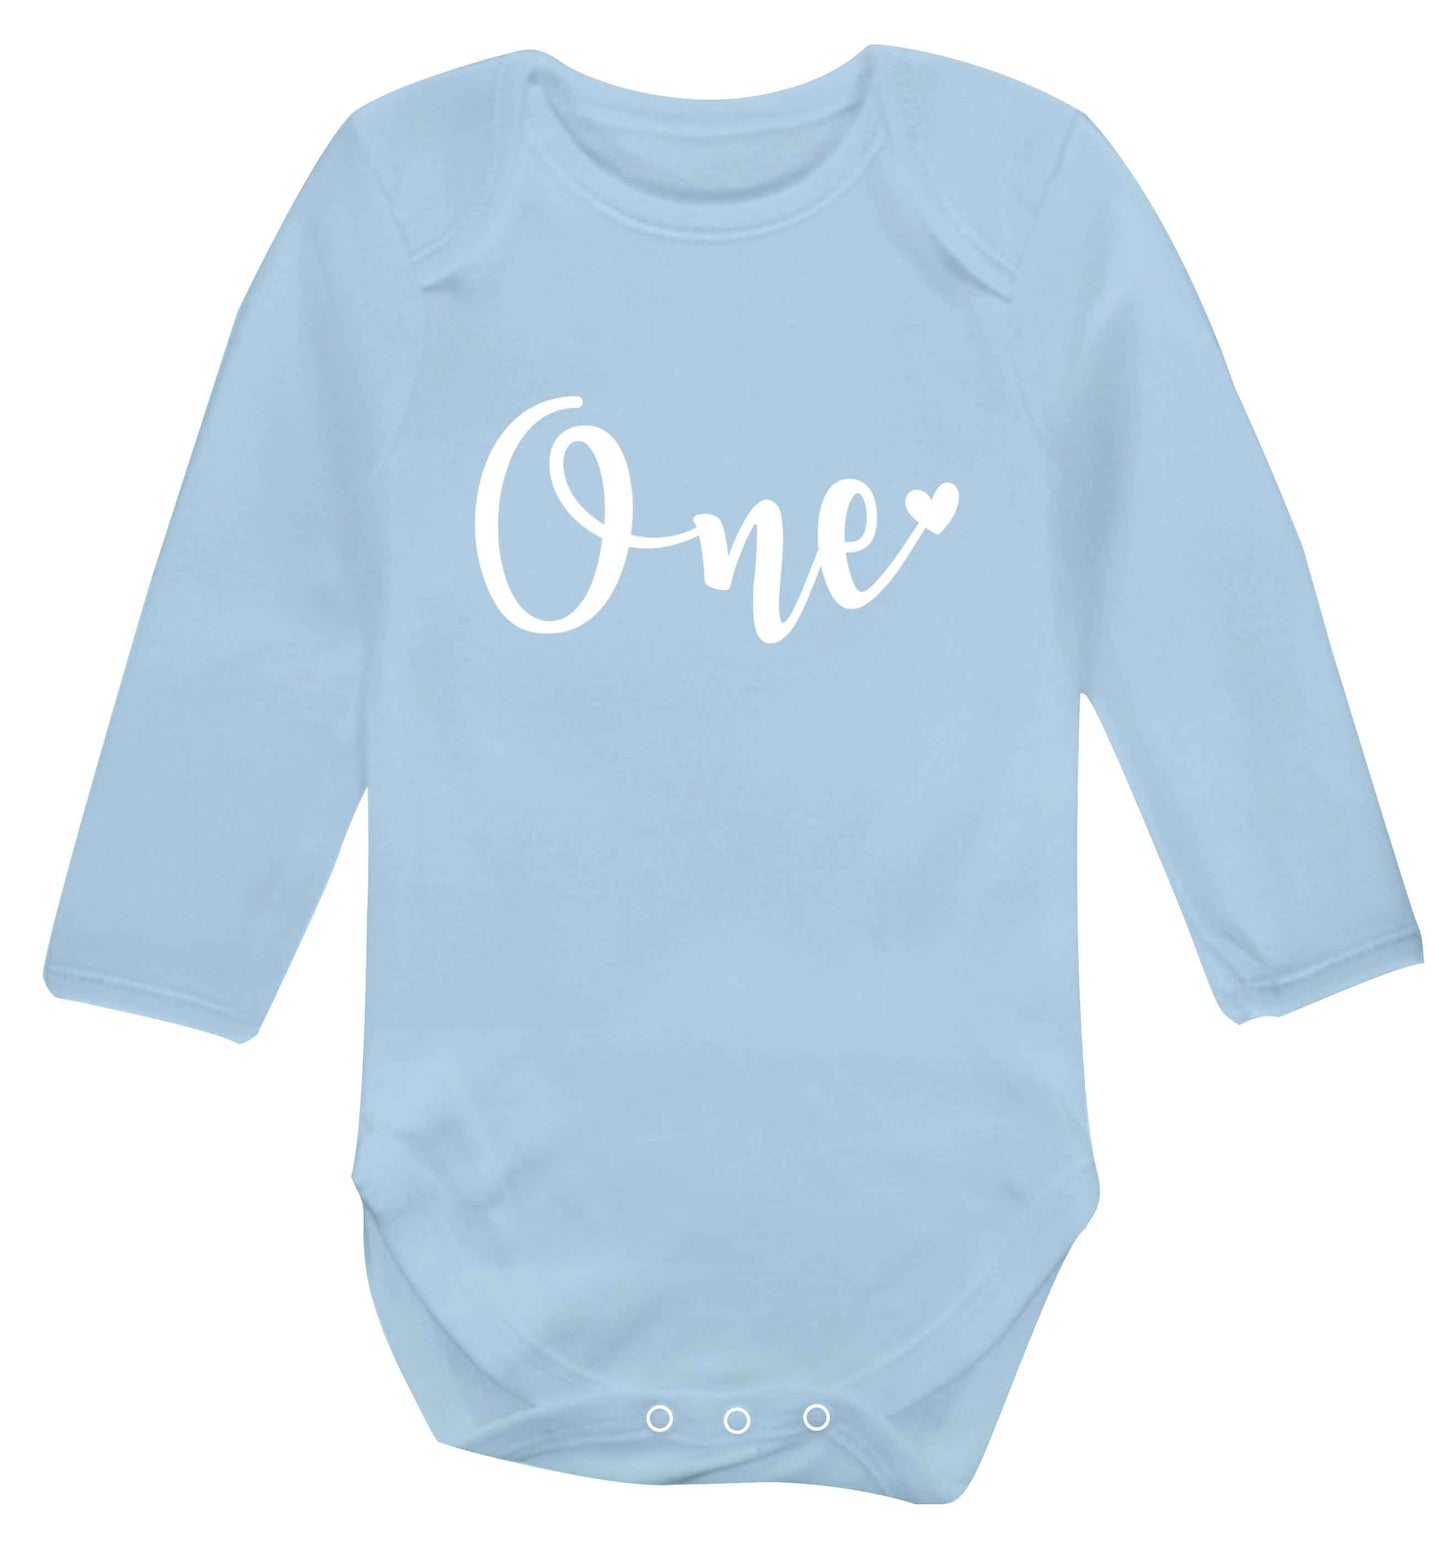 One baby vest long sleeved pale blue 6-12 months